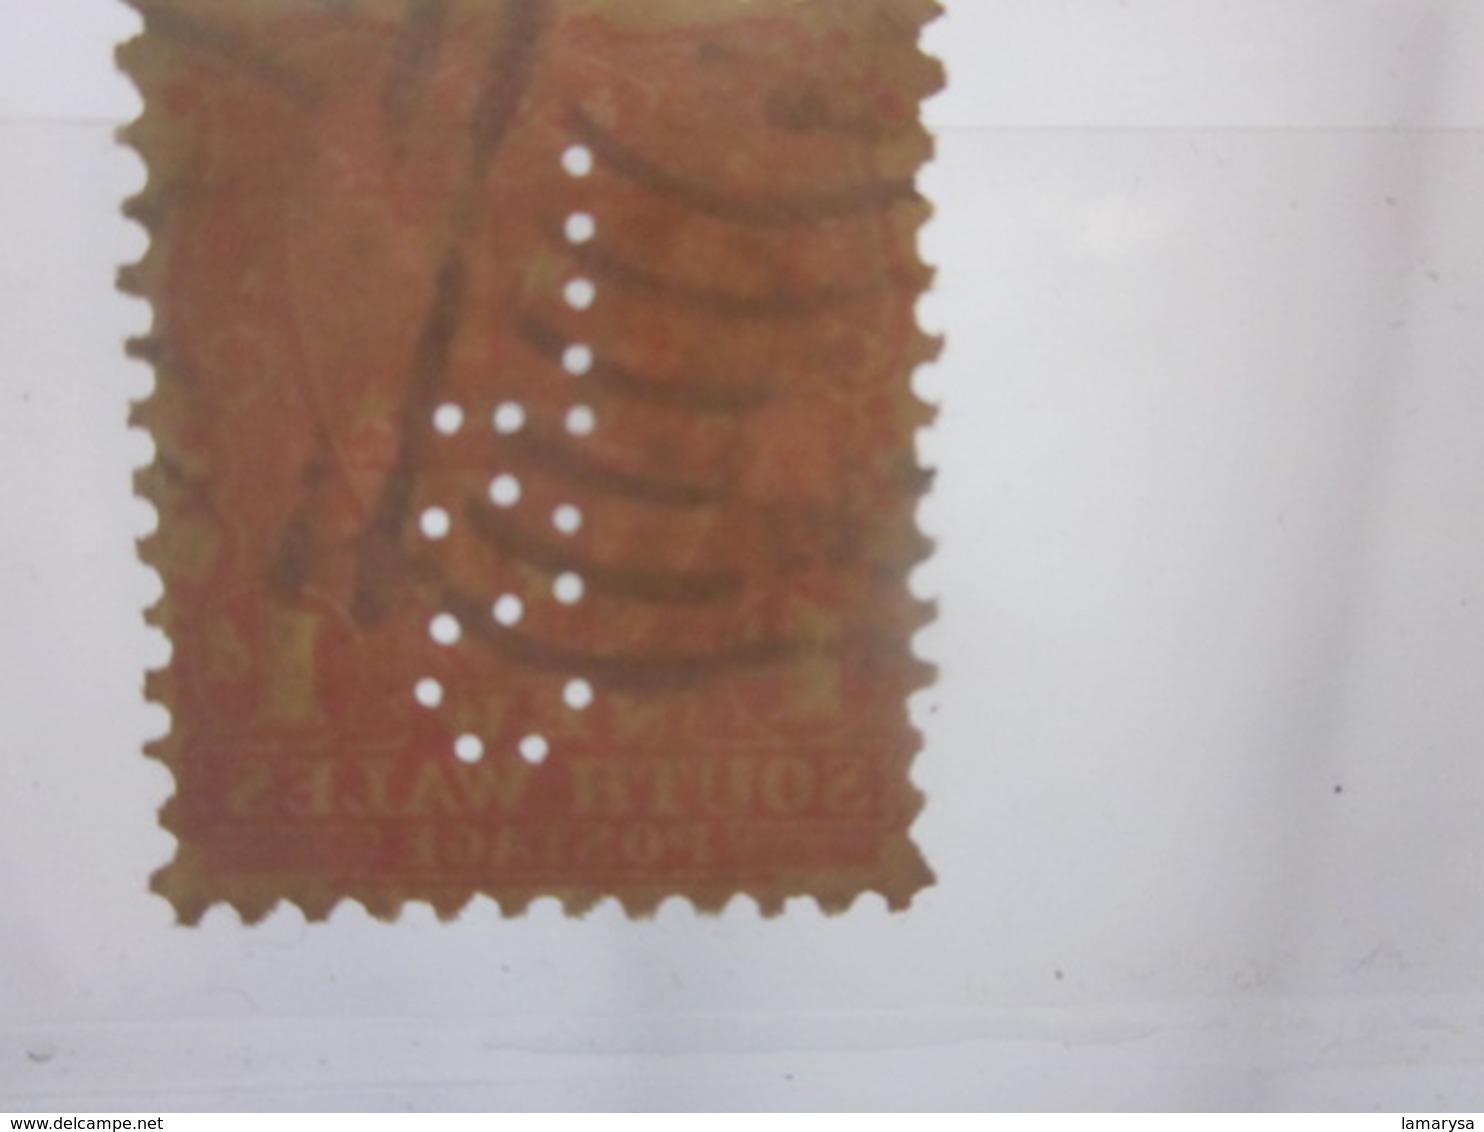 Stamp Timbre AUSTRALIE COLONY NEW SOUTH WALES Perforés Perforé Perforés Perfin Perfins Stamps Perforated Perforations LS - Perforés